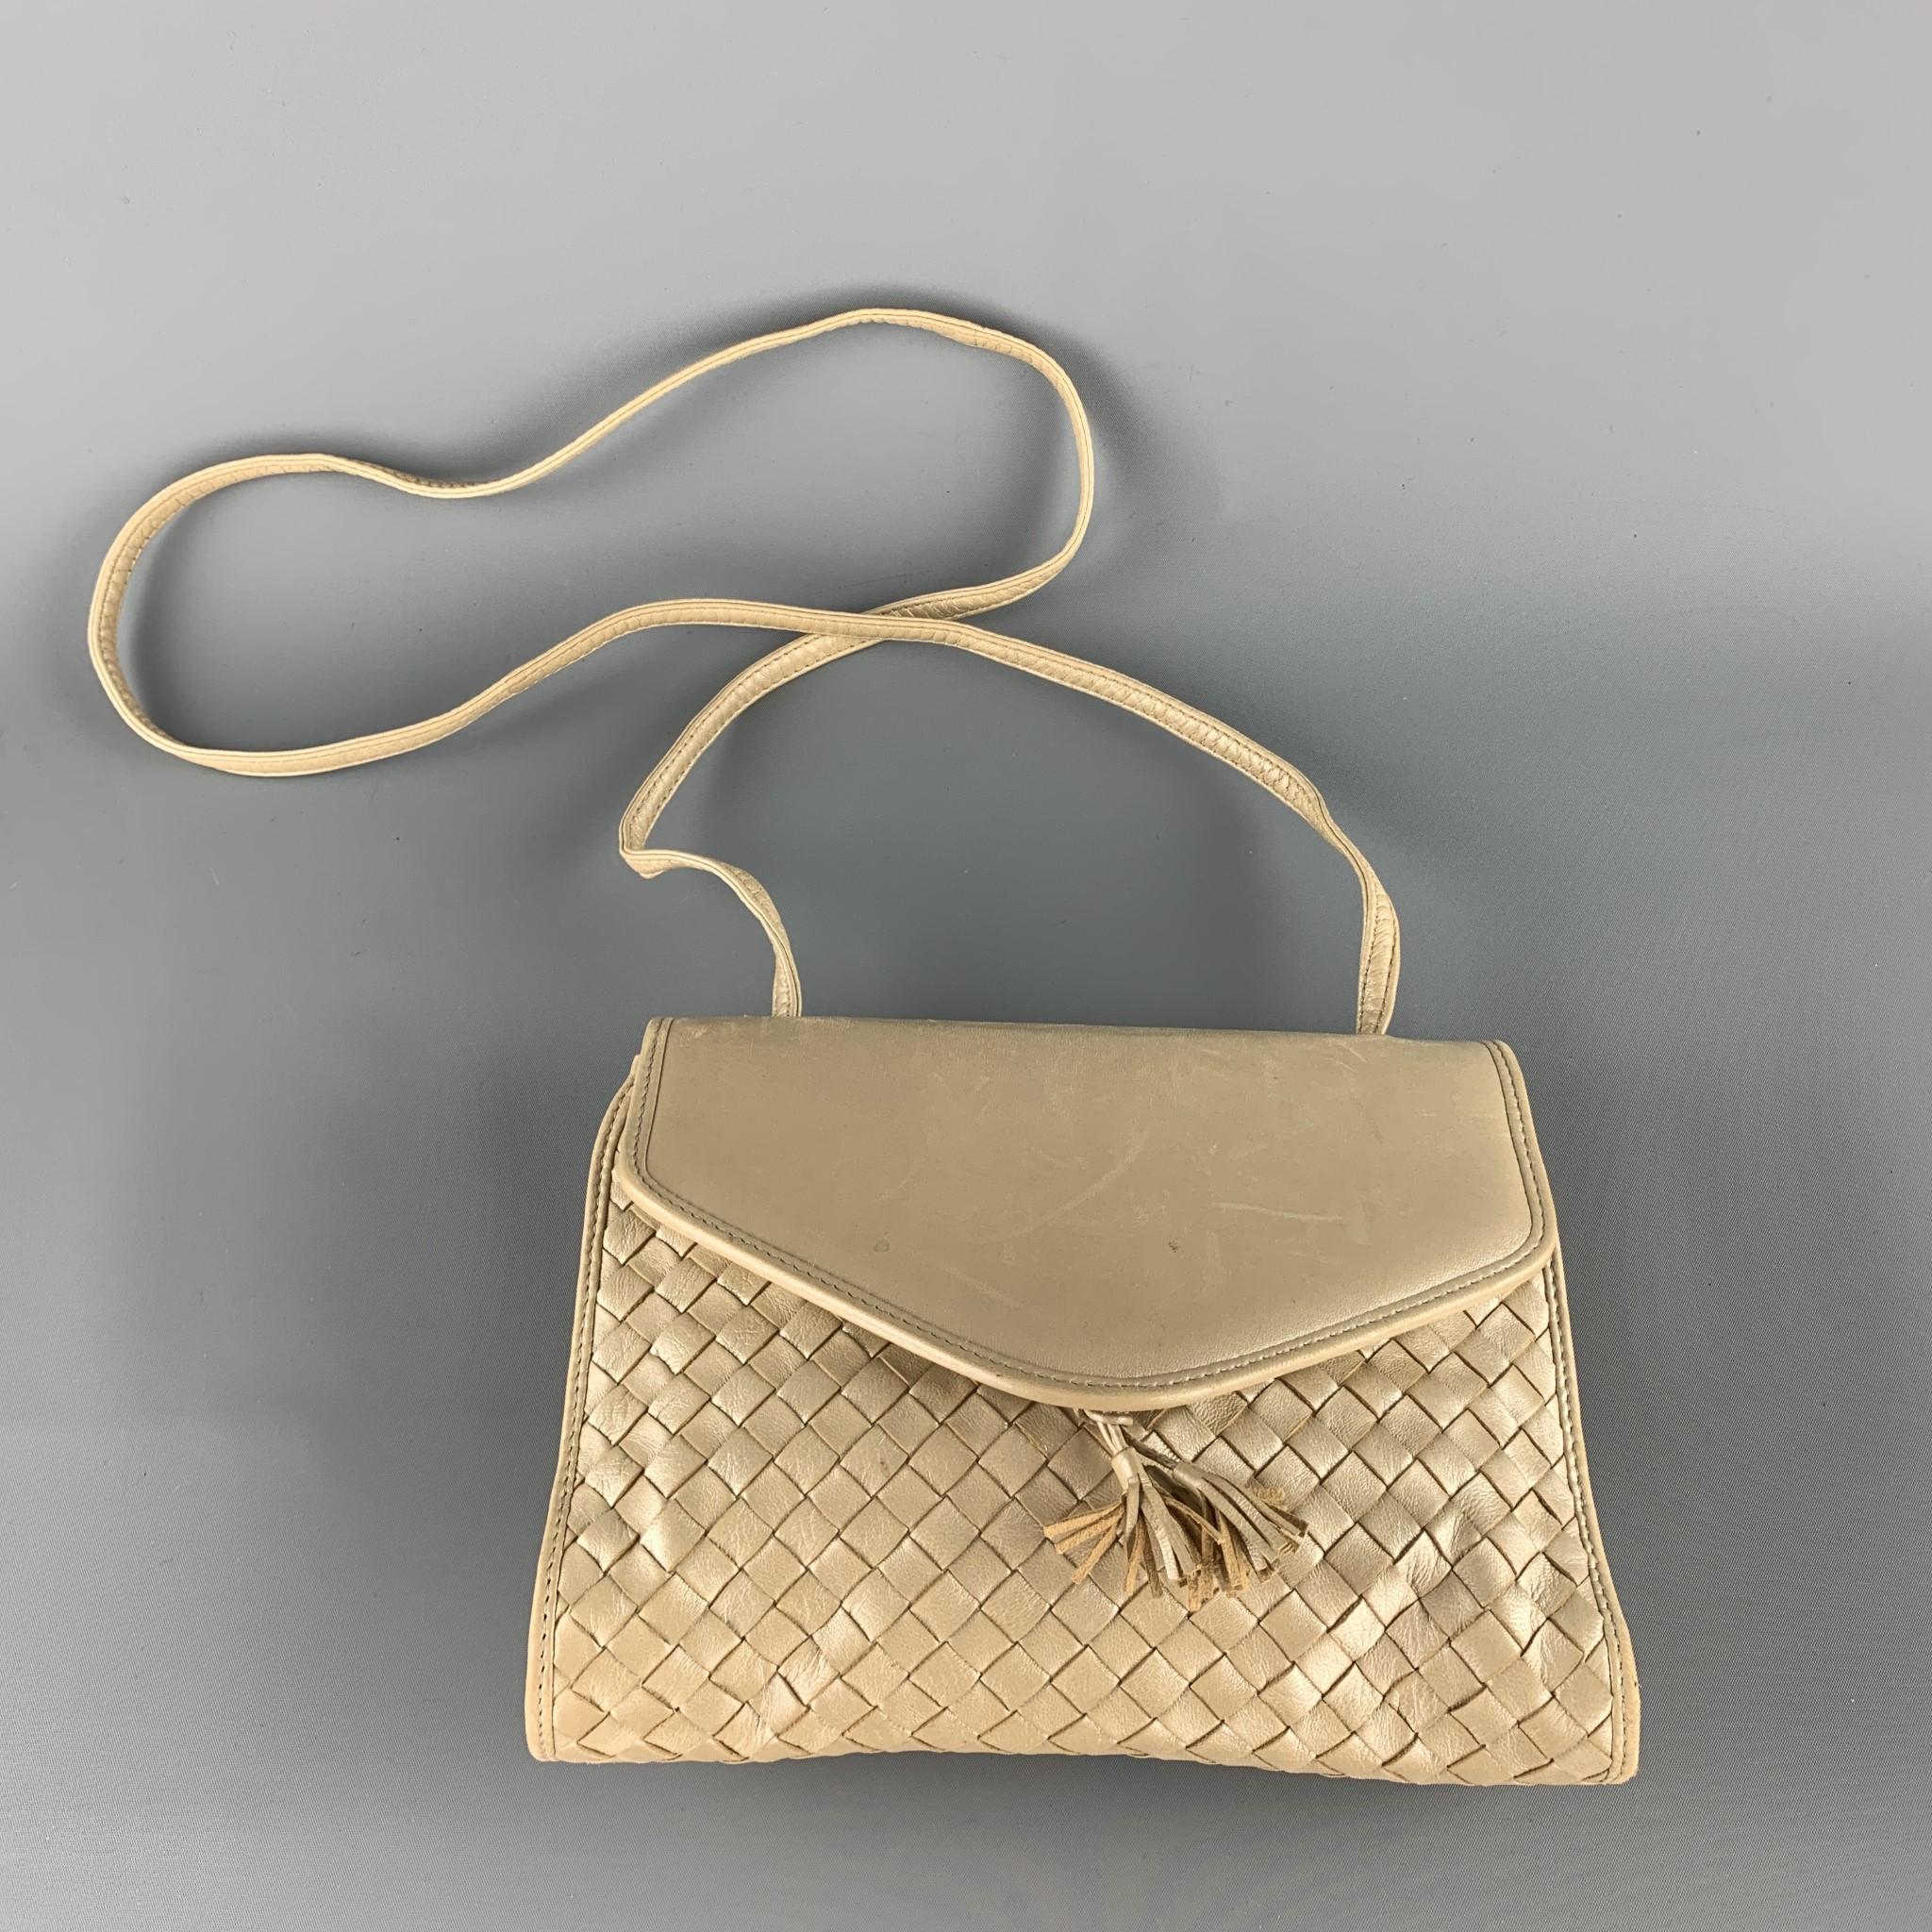 Vintage BOTTEGA VENETA bag comes in metallic champagne woven intrecciato leather with a smooth snap top flap, tassel accents, skinny strap, and leather interior. Made in Italy.

Very Good Pre-Owned Condition.

Measurements:

Length: 9 in.
Width: 2